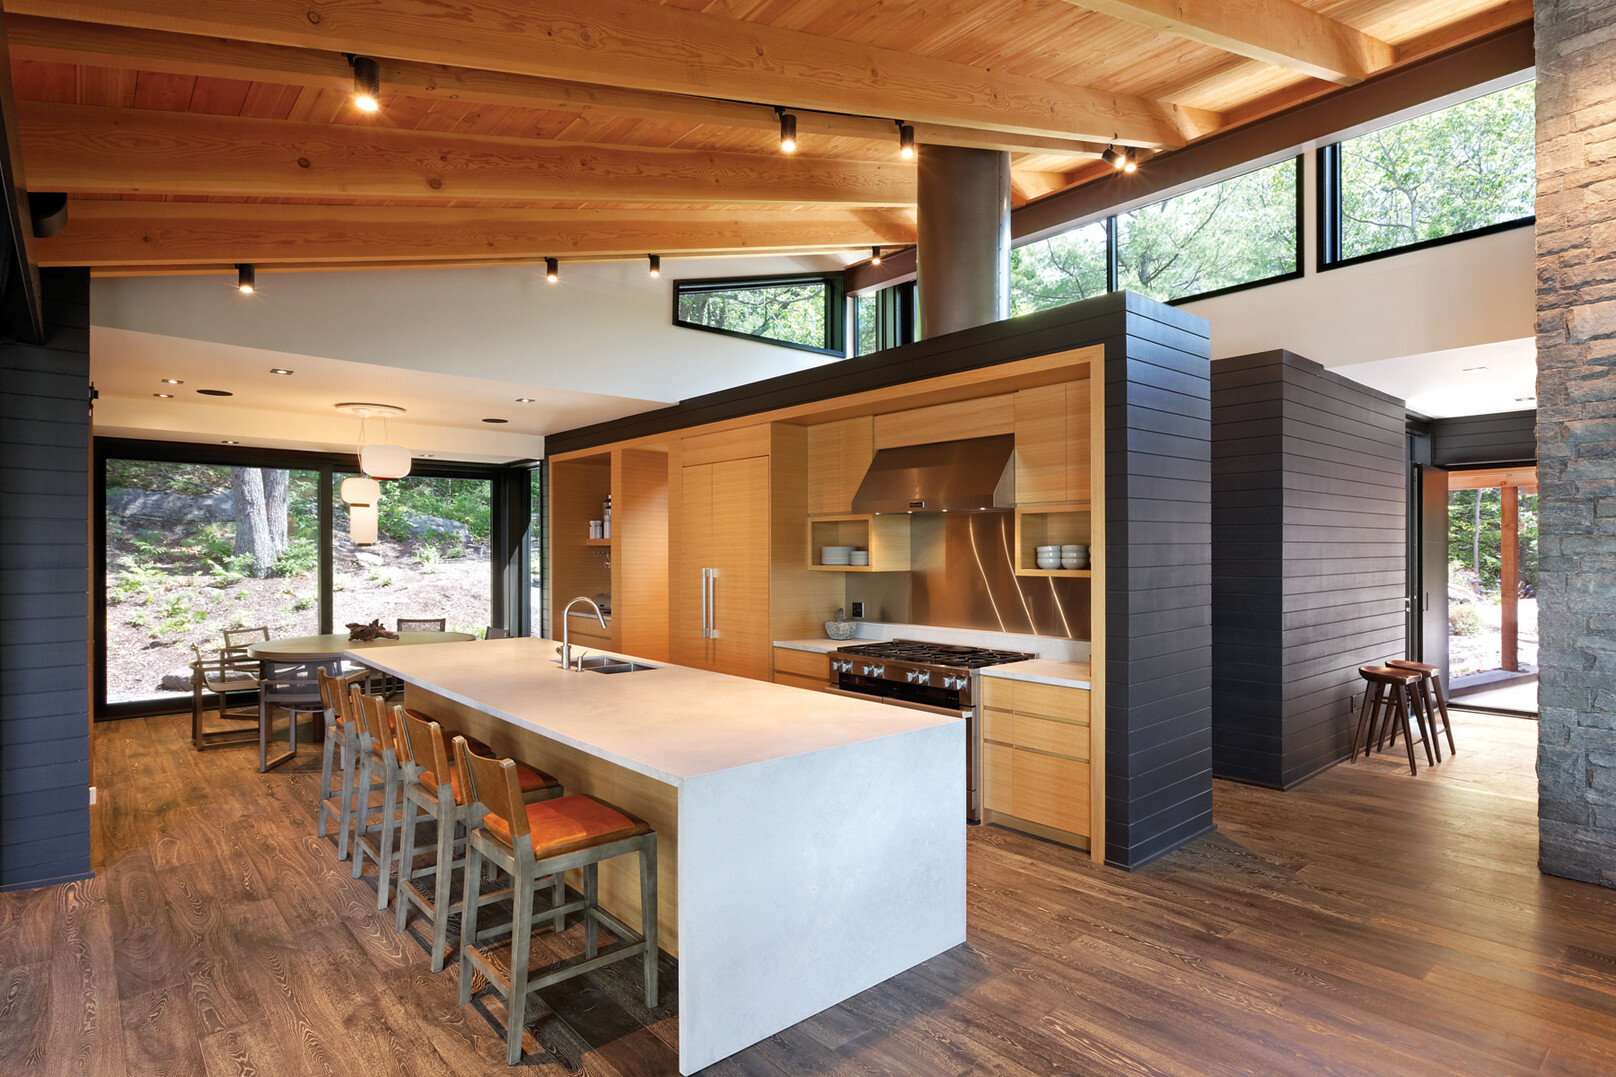 Wood millwork kitchen with large white island and slanted wood rafter ceiling and clerestrory windows